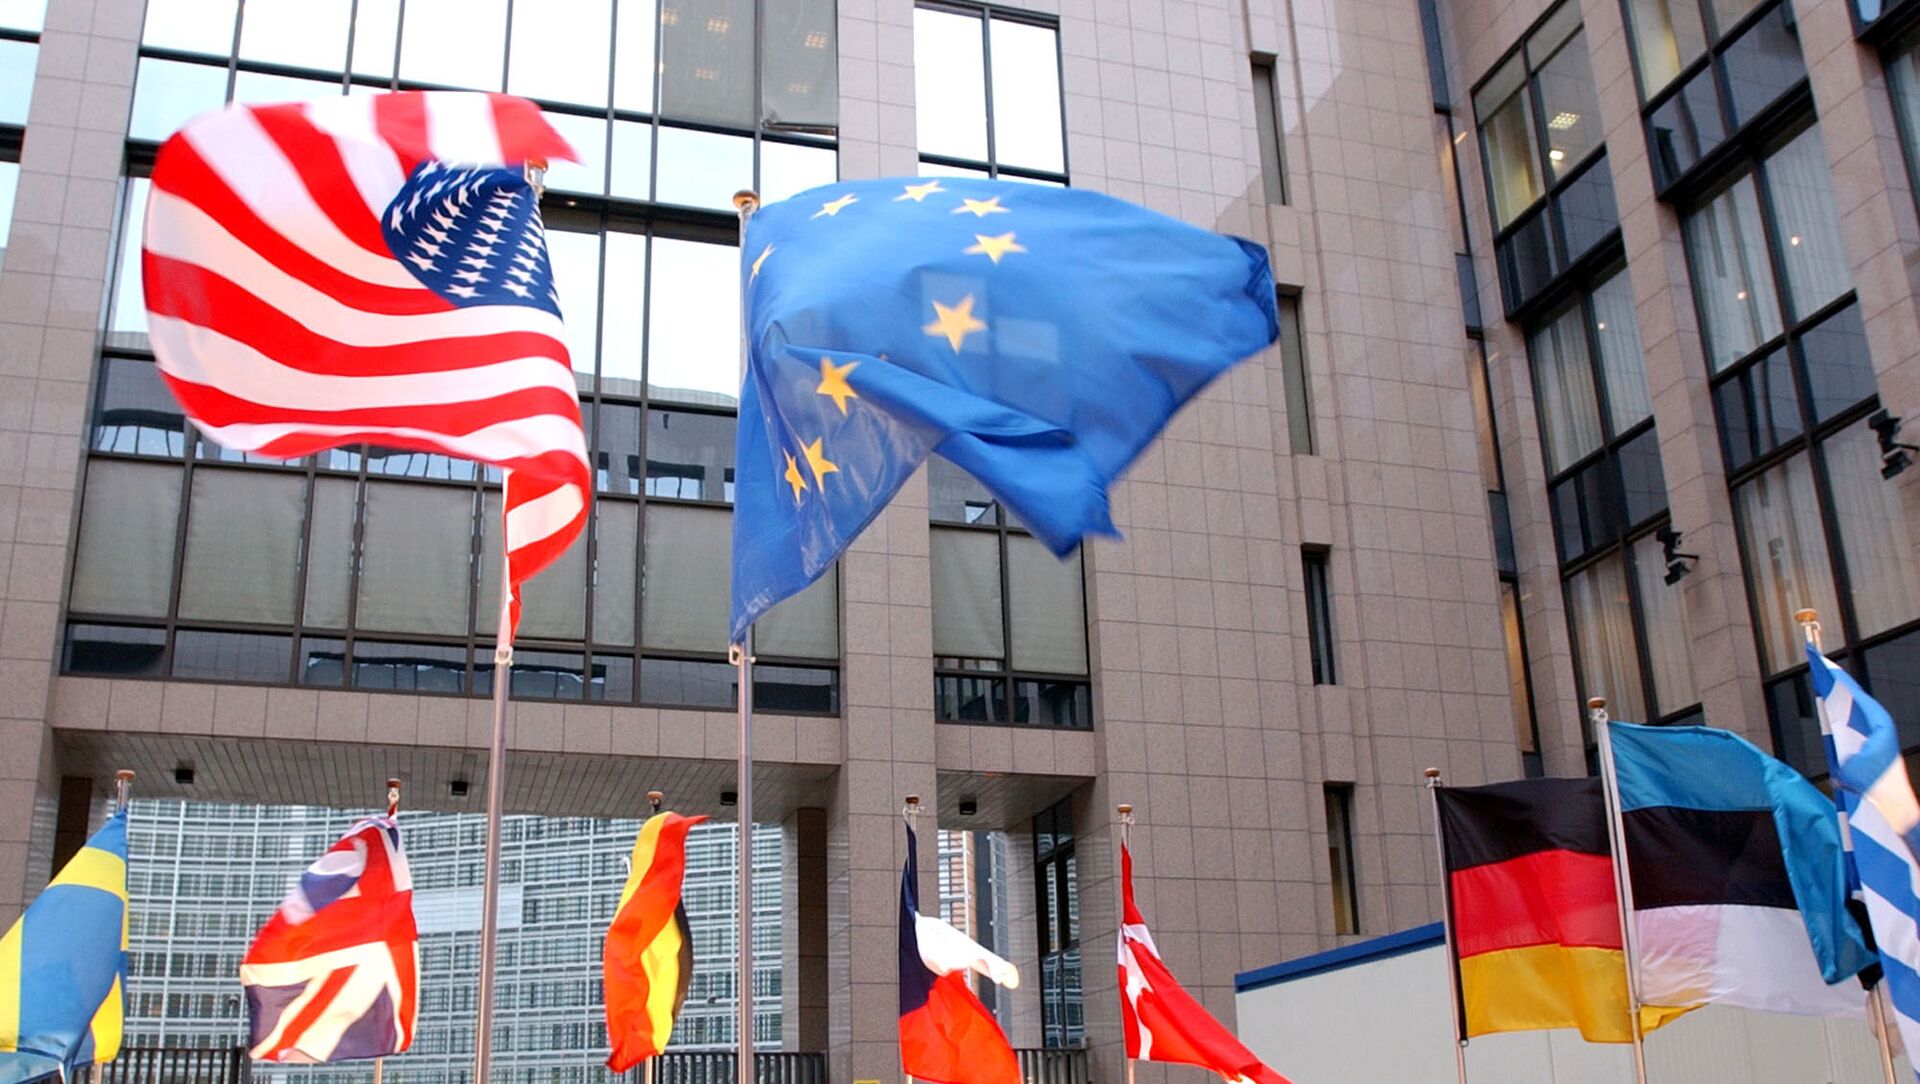 The US and EU flags, top left and right, fly in separate directions at the European Council building in Brussels - Sputnik Moldova-România, 1920, 15.06.2021